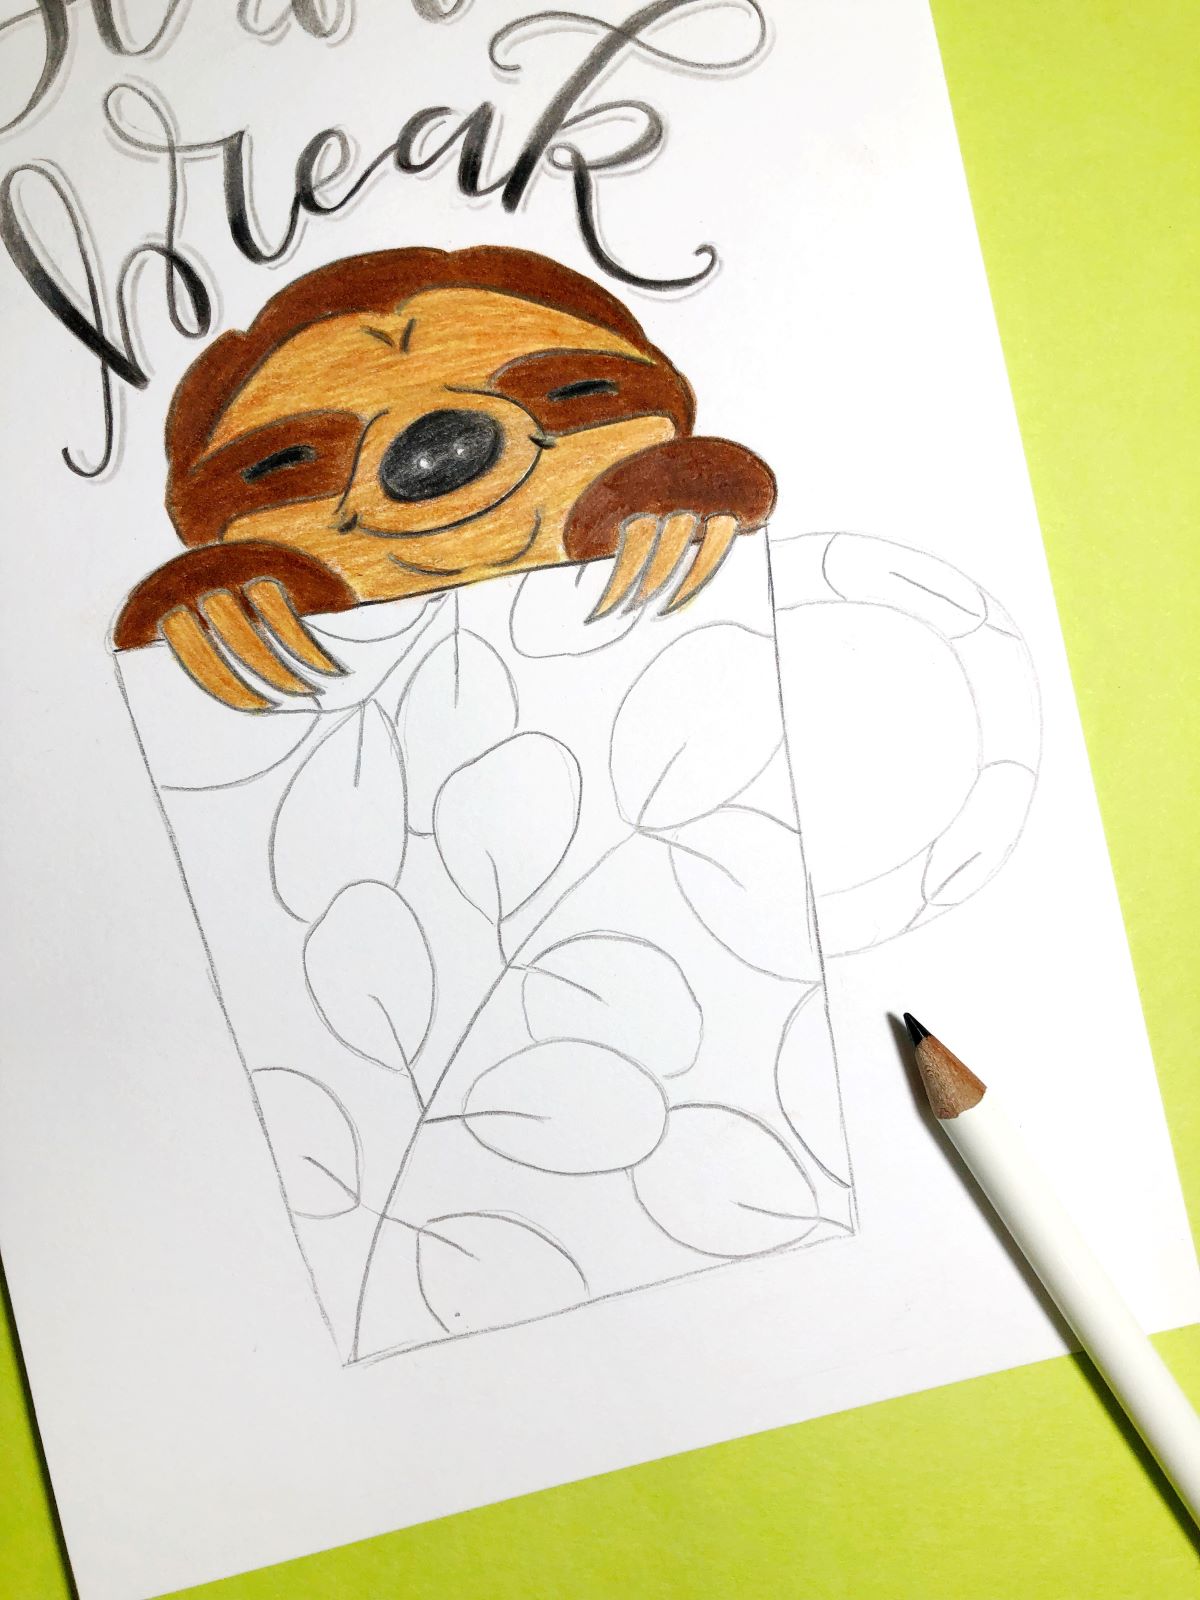 Blend Tombow's Irojiten Colored Pencils to Create Sloth Art. Learn with @aheartenedcalling #tombow #coloredpencils